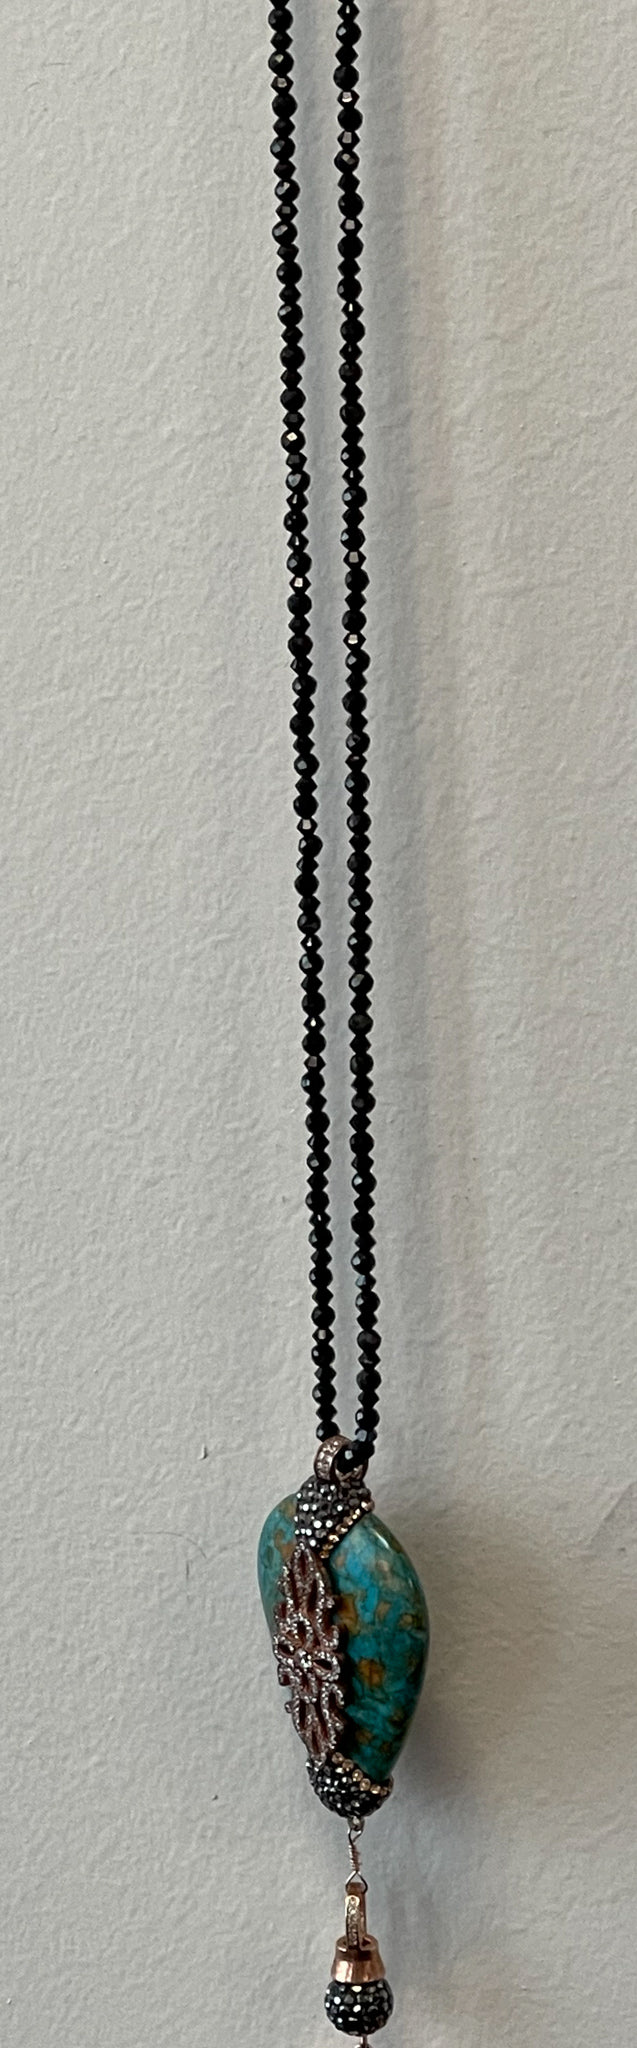 Turquoise, Black Spinel and Tassel Necklace